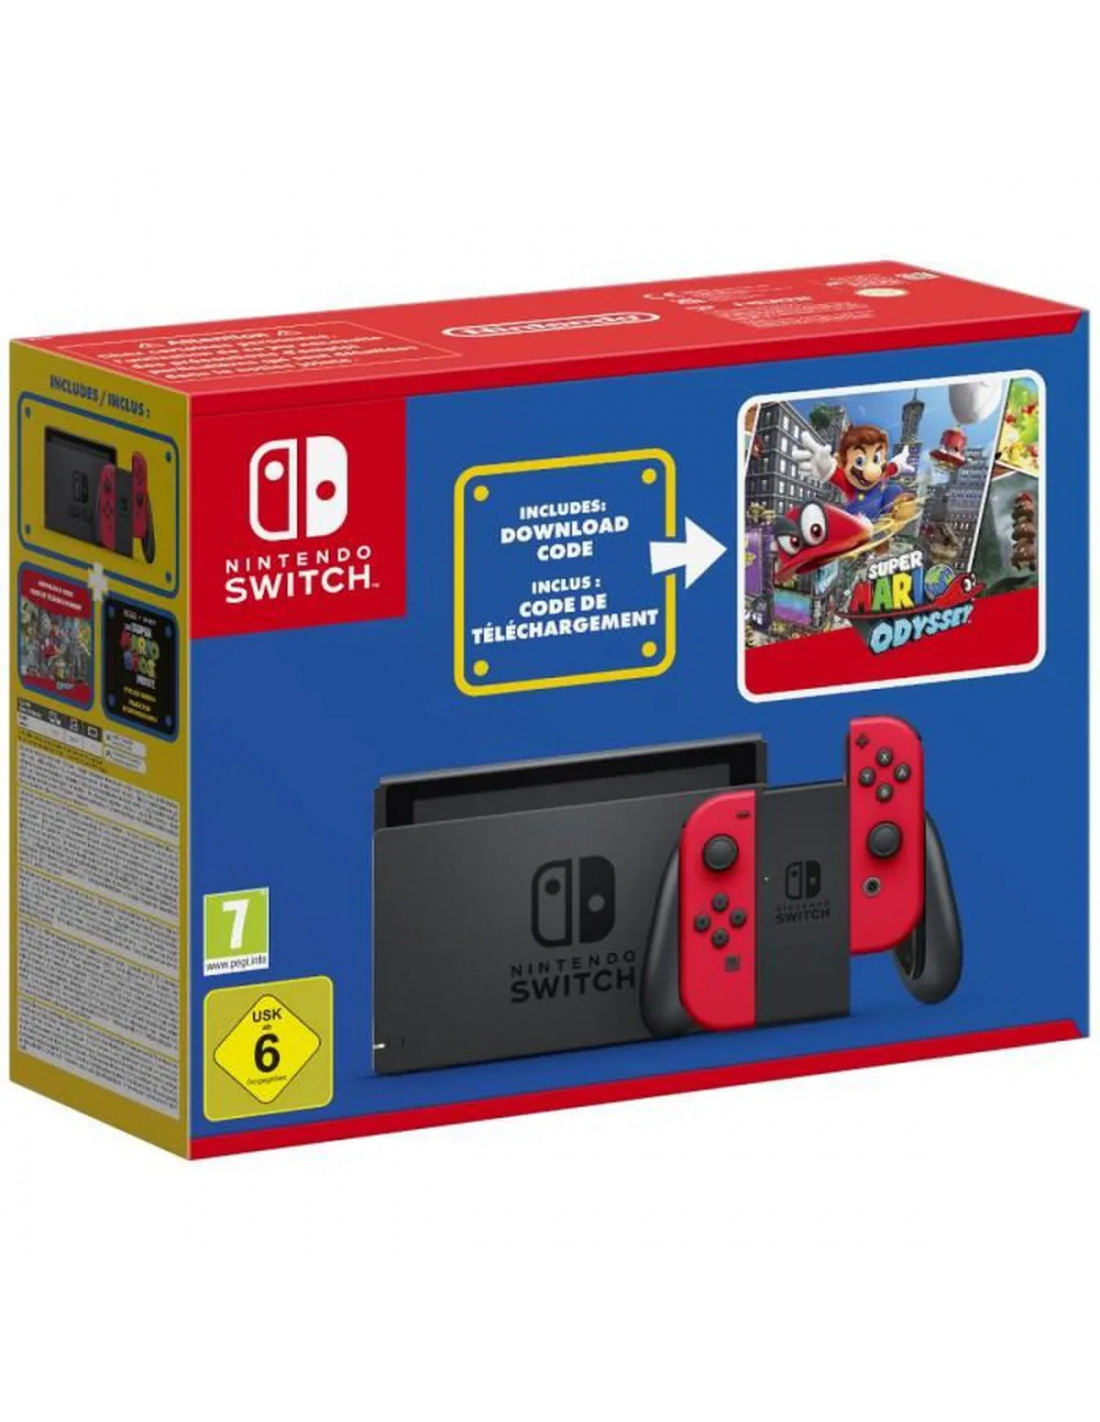 https://gamingstore.ma/501-thickbox_default/console-nintendo-switch-avec-joy-cons-rouges-edition-limitee-super-mario-odyssey-code-stickers-super-mario-bros.jpg